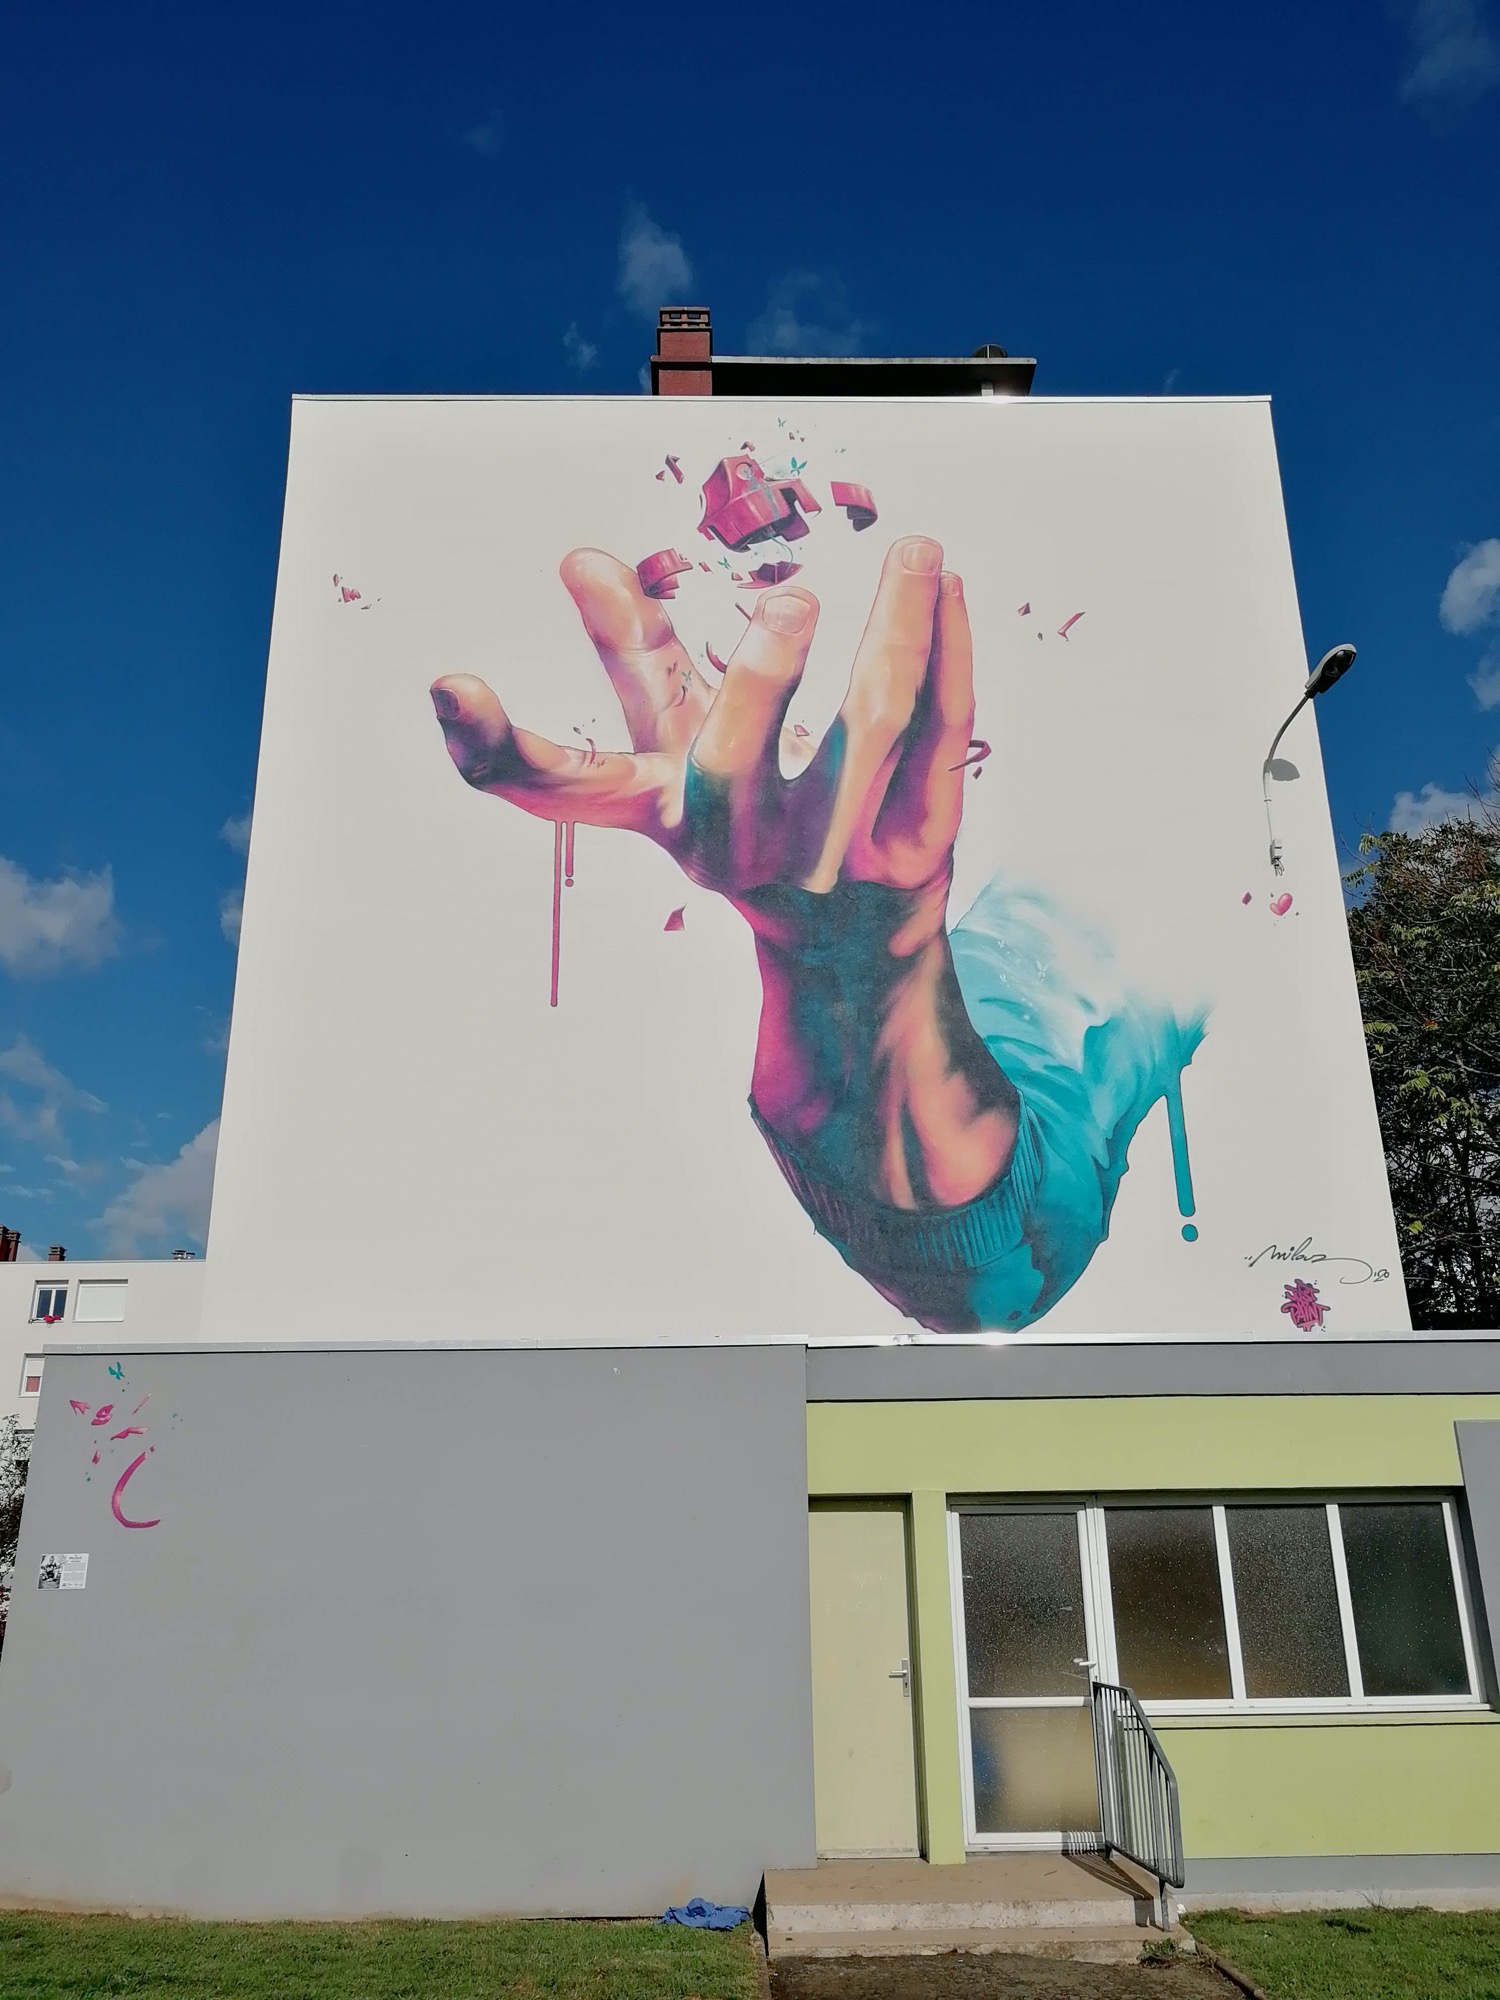 Graffiti 4496  by the artist Milouz captured by Rabot in Saint-Brieuc France